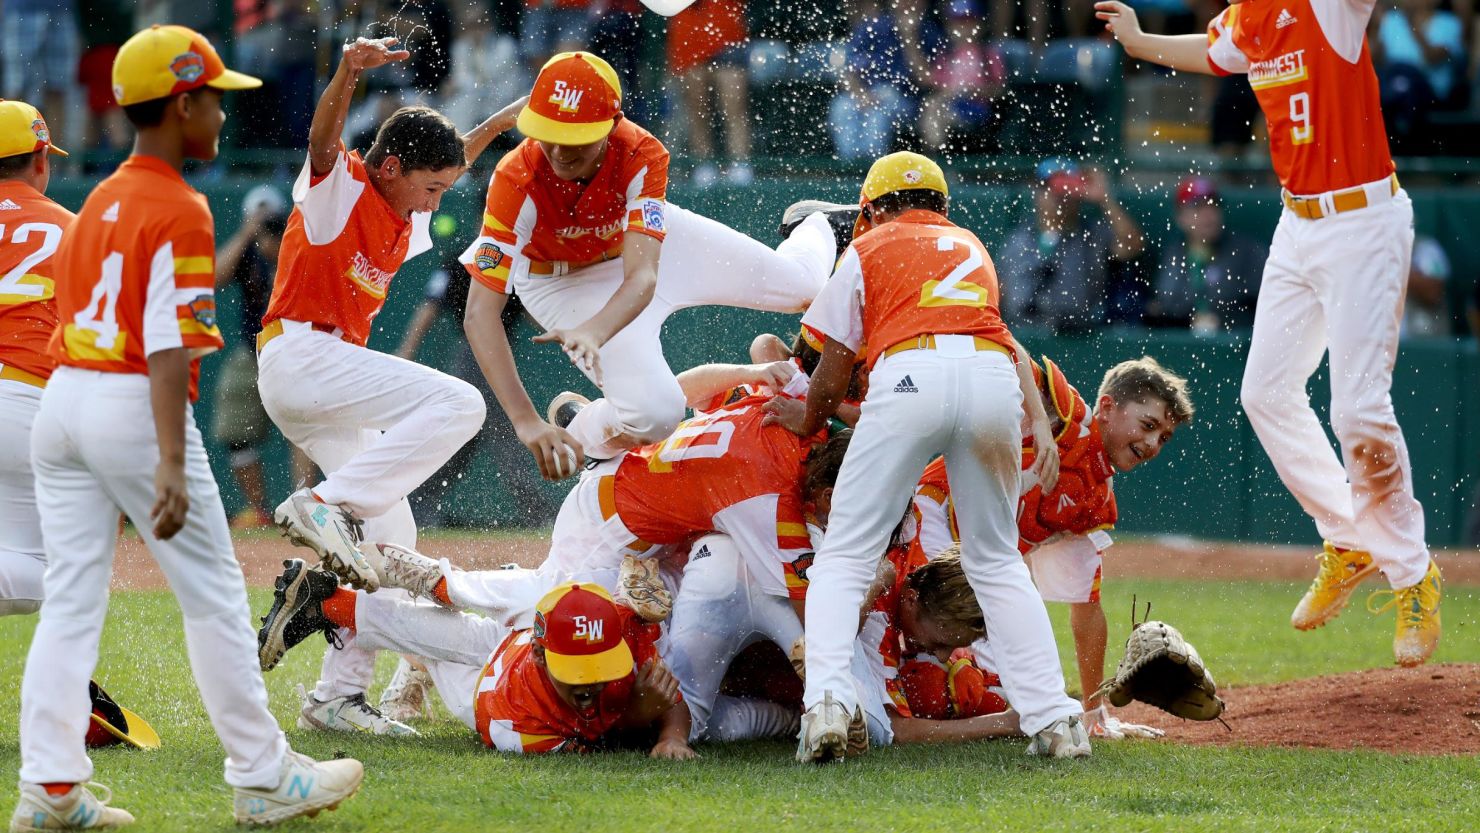 Members of the Eastbank Little League team from River Ridge, Louisiana, celebrate after winning the Little League World Series on August 25, 2019, in South Williamsport, Pennsylvania. 